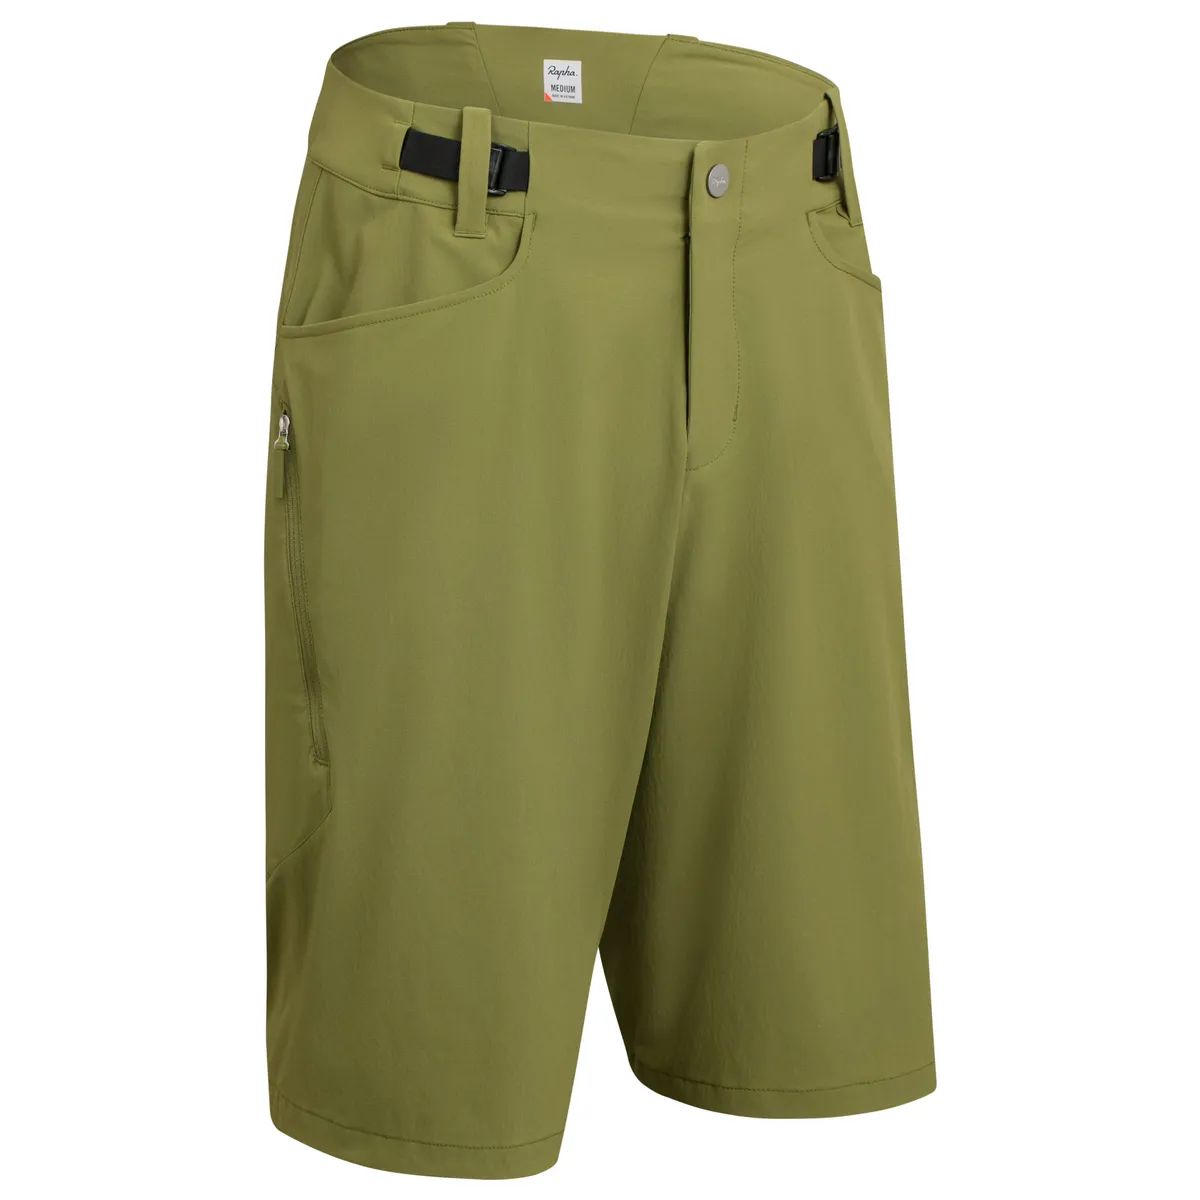 Rapha Trail Shorts in Mayfly, Anthracite